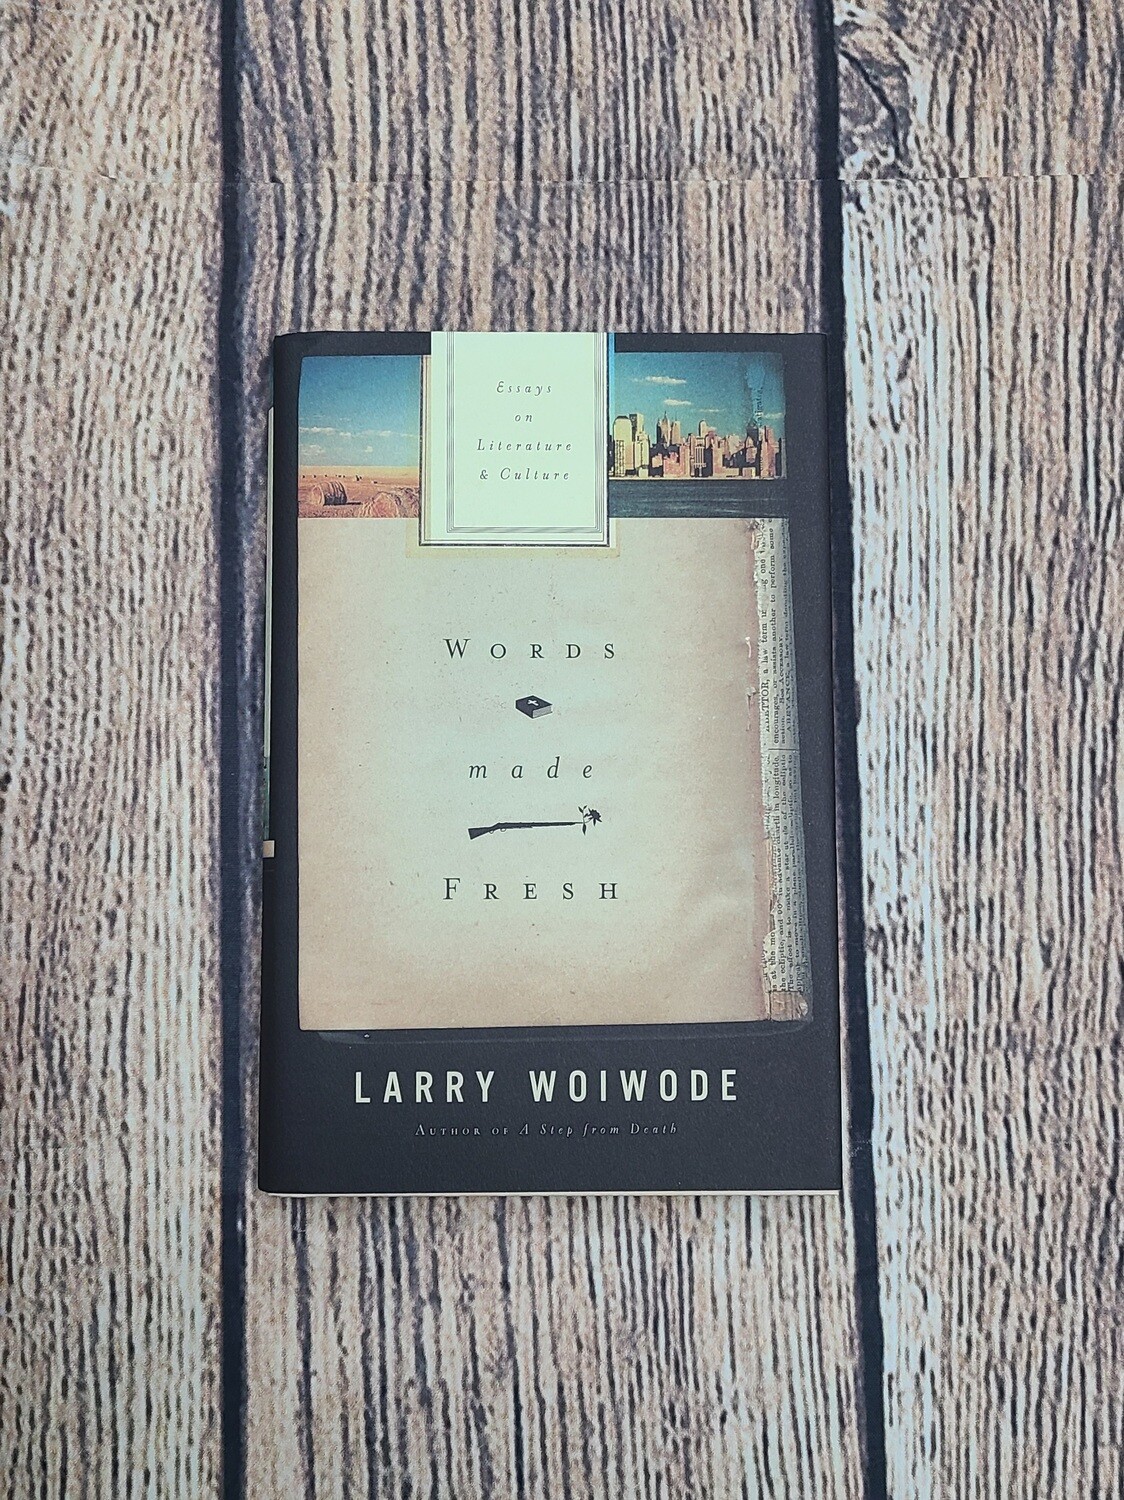 Words made Fresh by Larry Woiwode